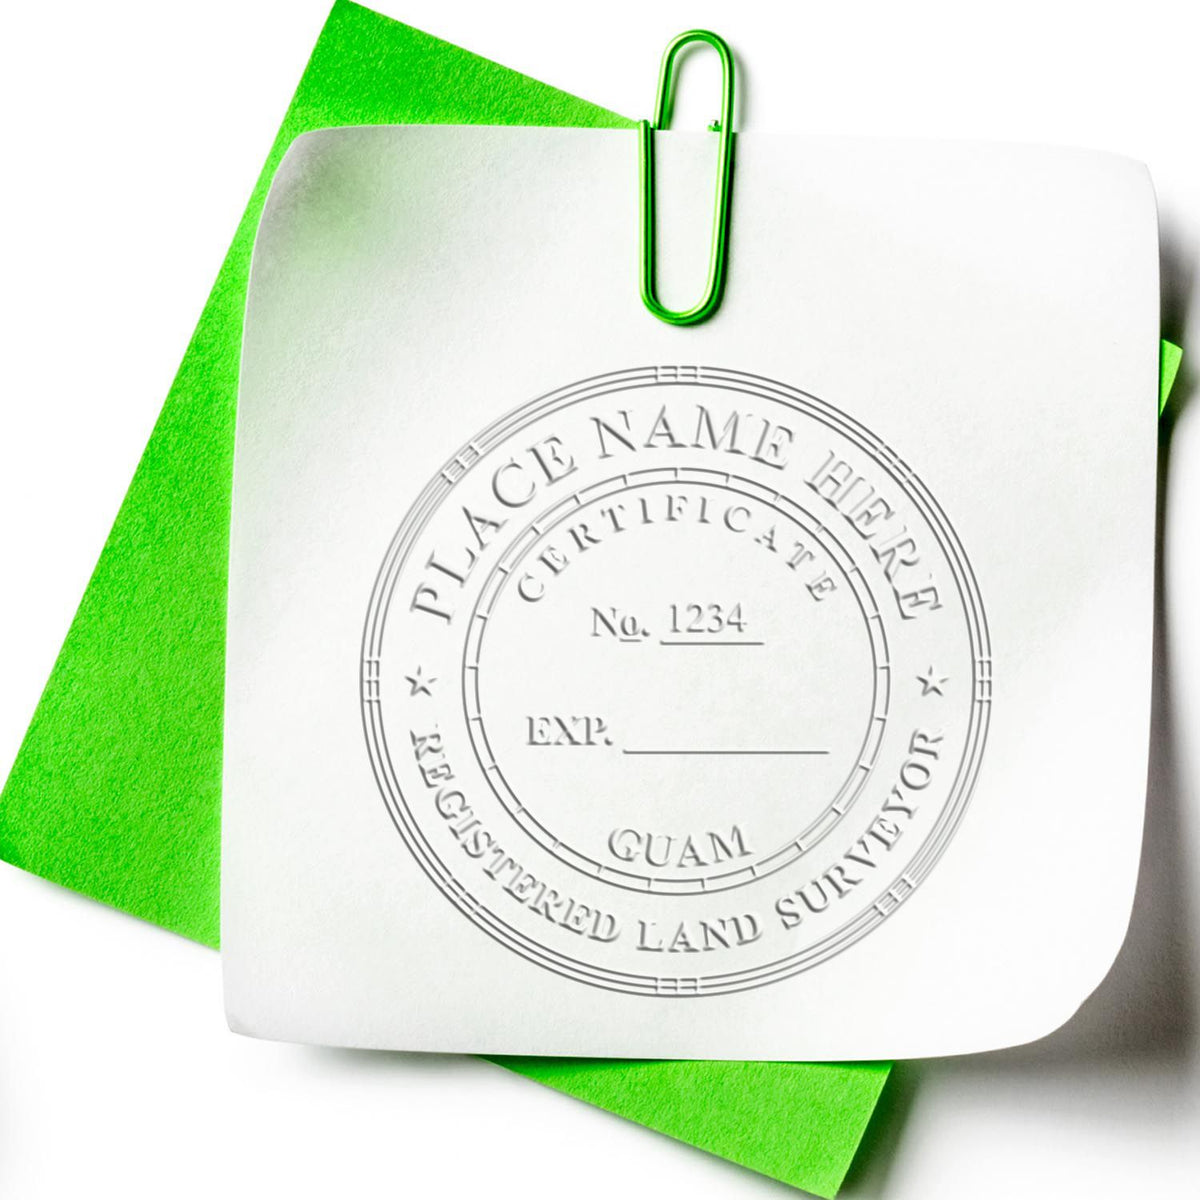 An in use photo of the Hybrid Guam Land Surveyor Seal showing a sample imprint on a cardstock